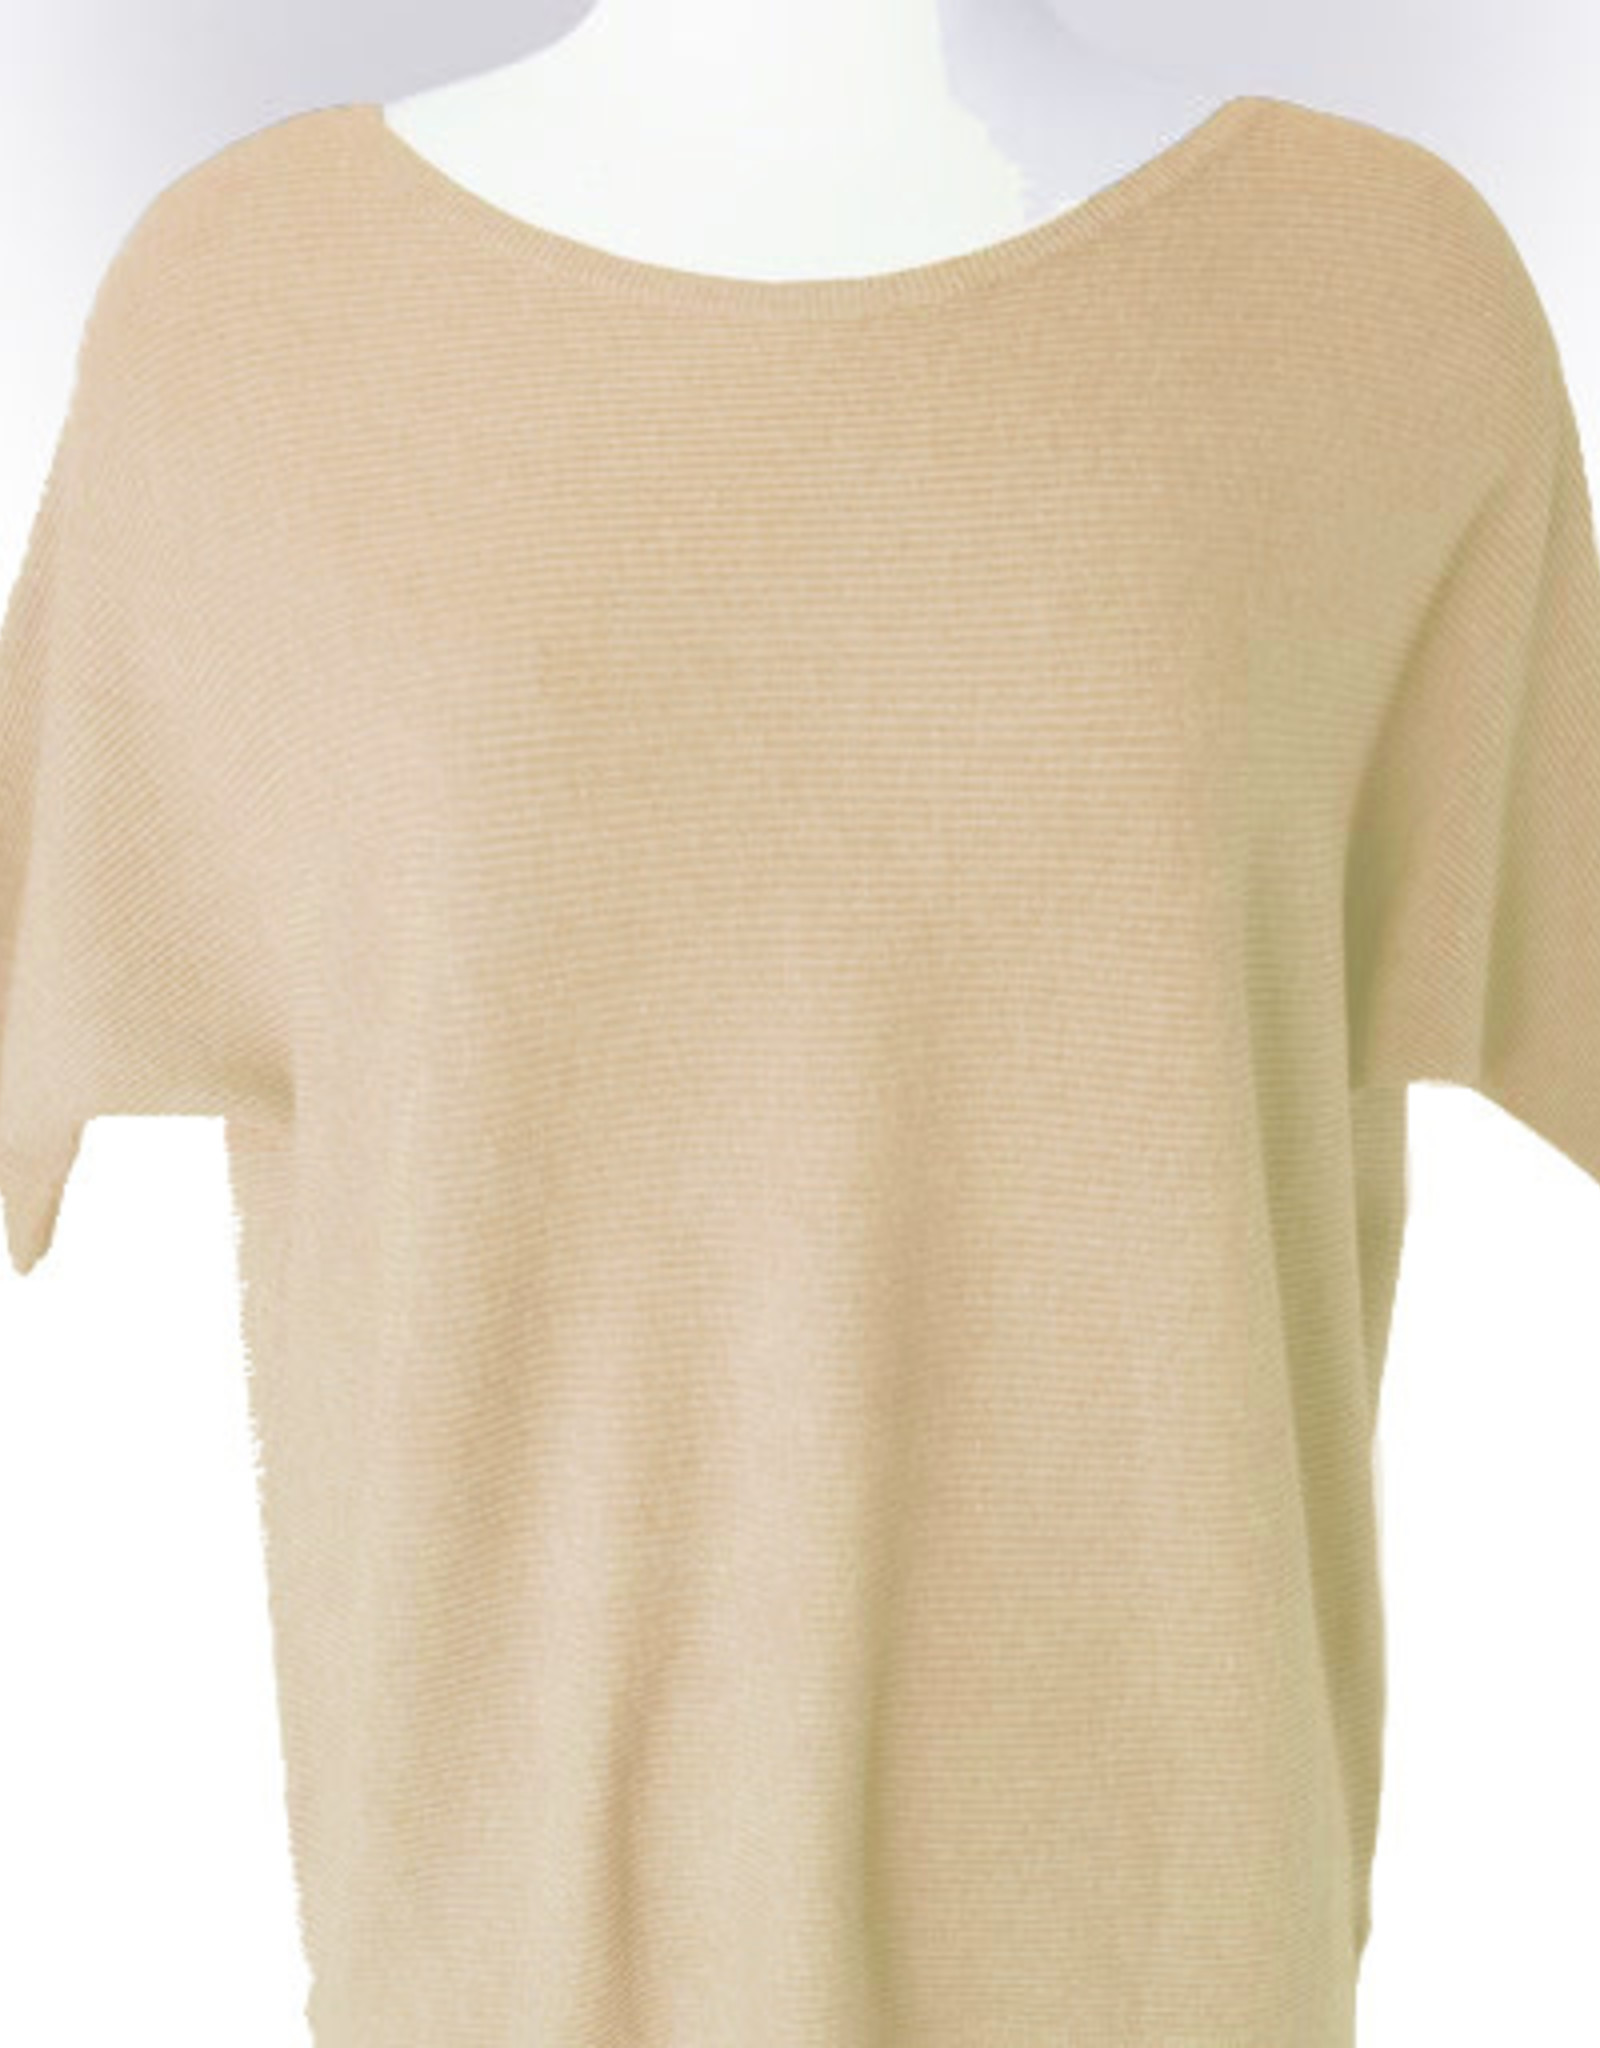 - Sand Ribbed Texture Round Neck Dolman Short Sleeve Top